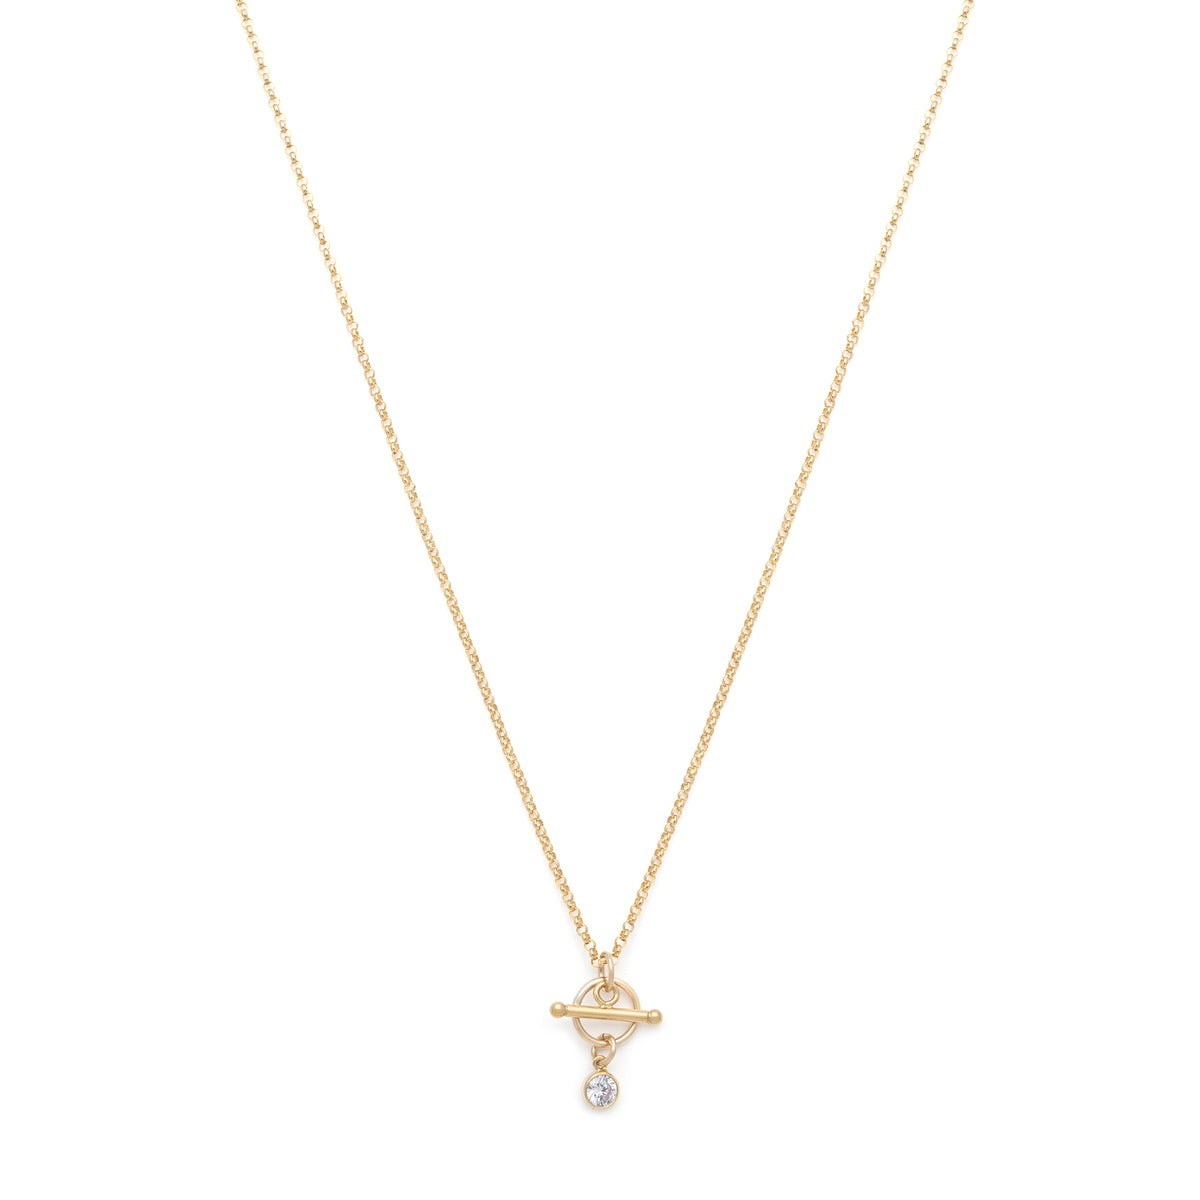 Odis Necklace - Gold | Leah Yard Designs